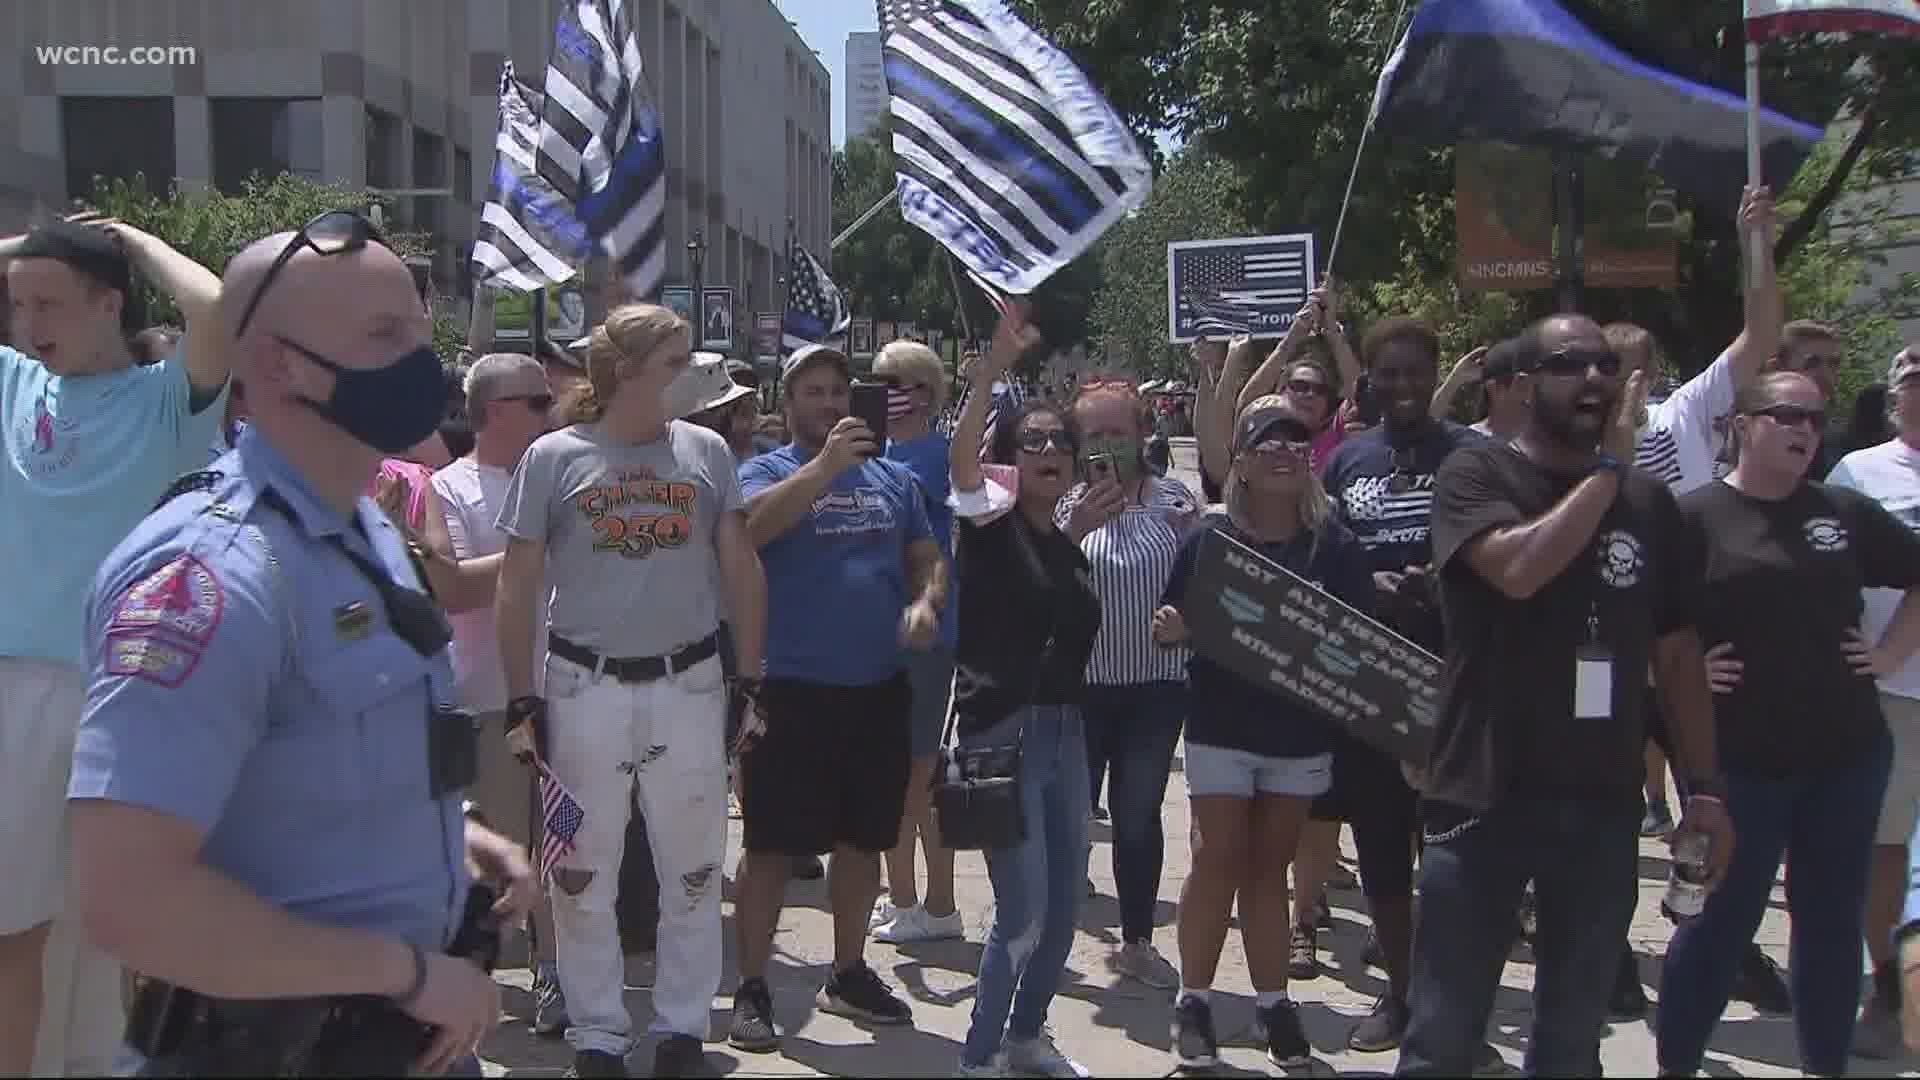 The event was organized by a Facebook group called "Back the Blue N.C."